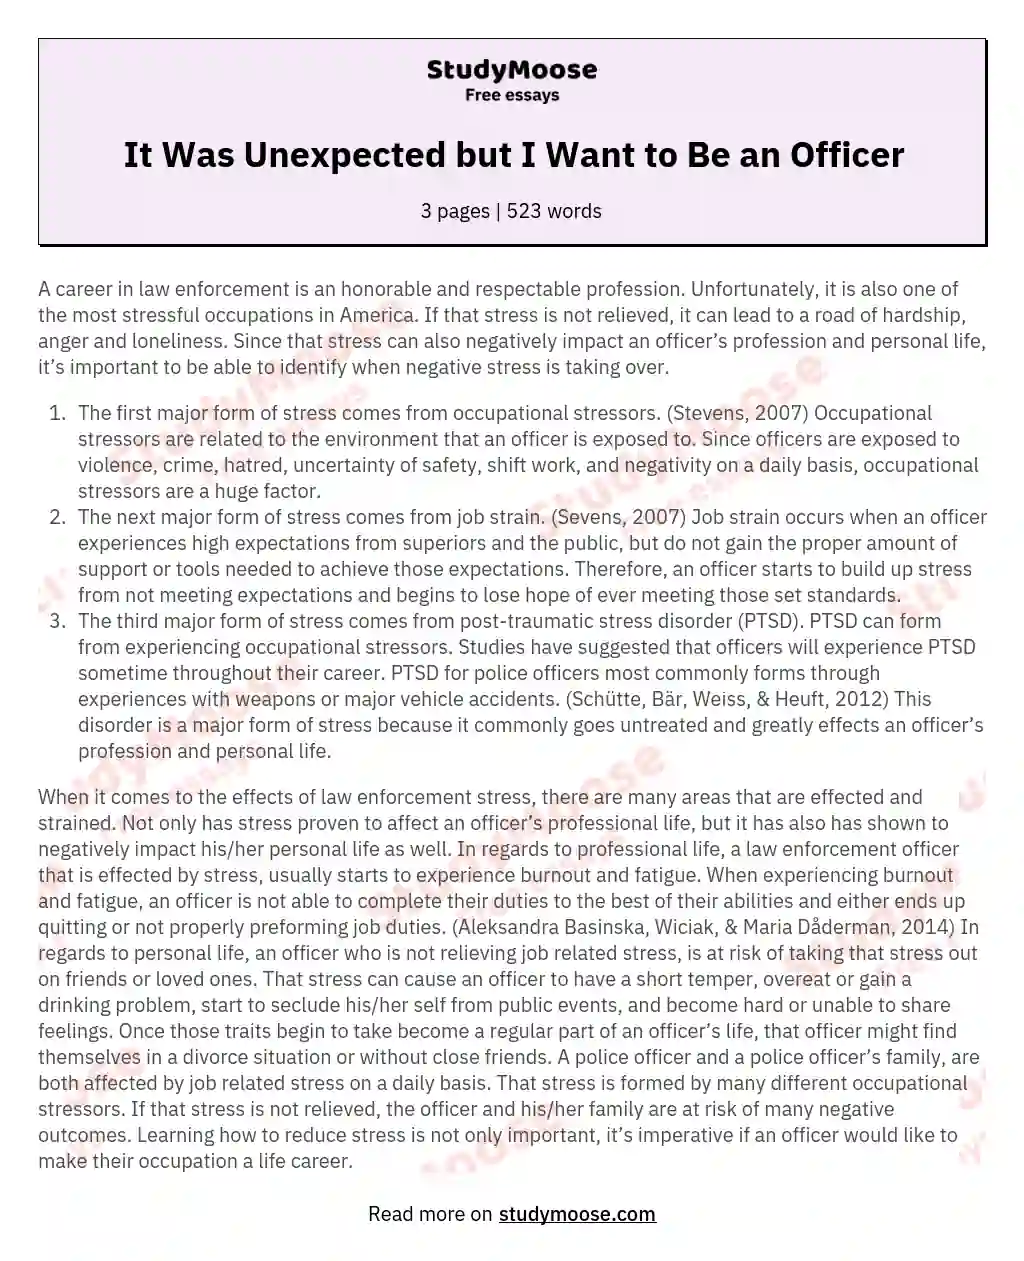 It Was Unexpected but I Want to Be an Officer essay